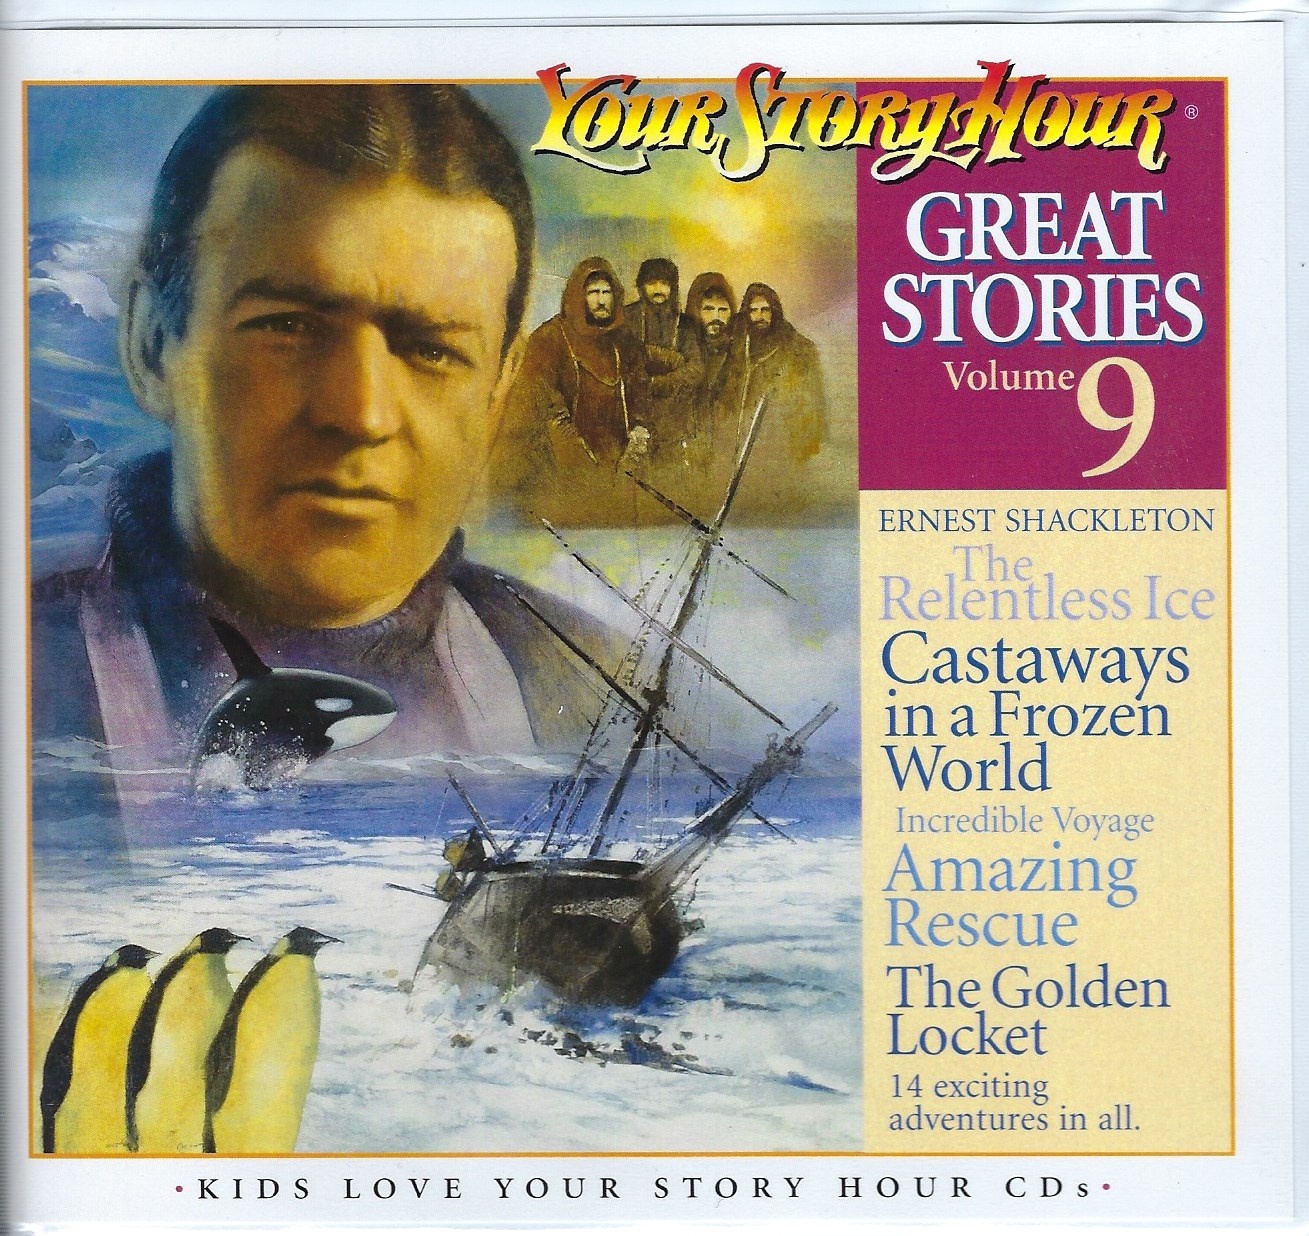 GREAT STORIES VOLUME 9 CD ALBUM Your Story Hour